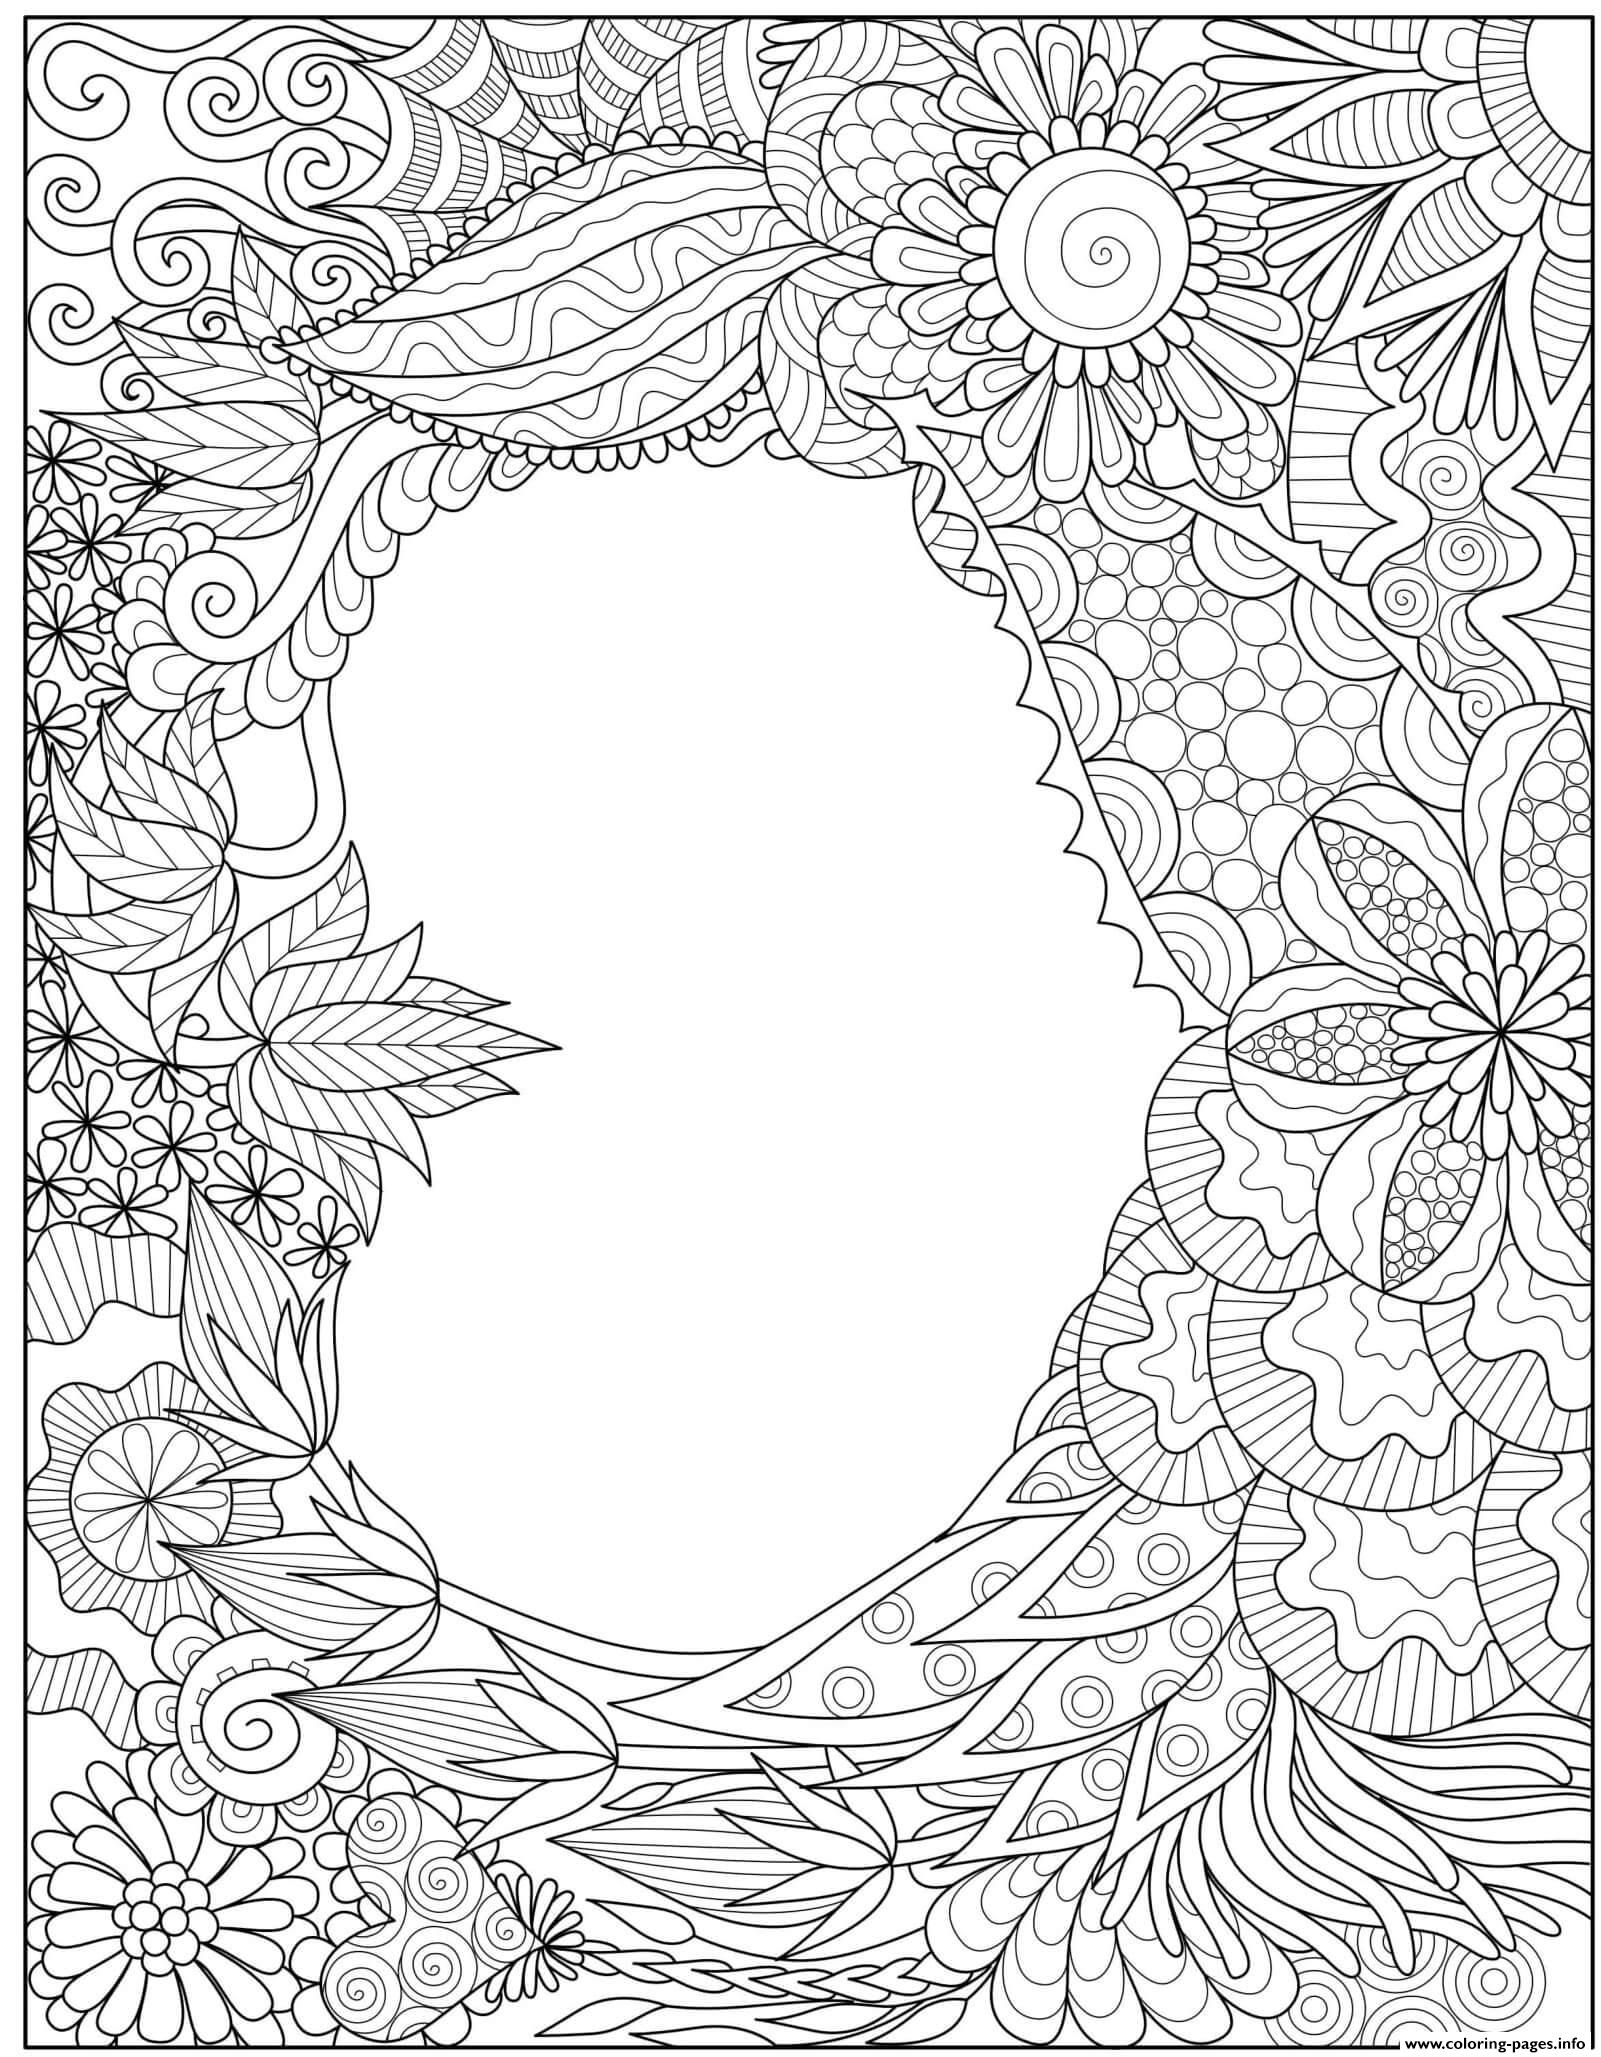 Mothers Day Heart Intricate Doodle Border Coloring Page Printable